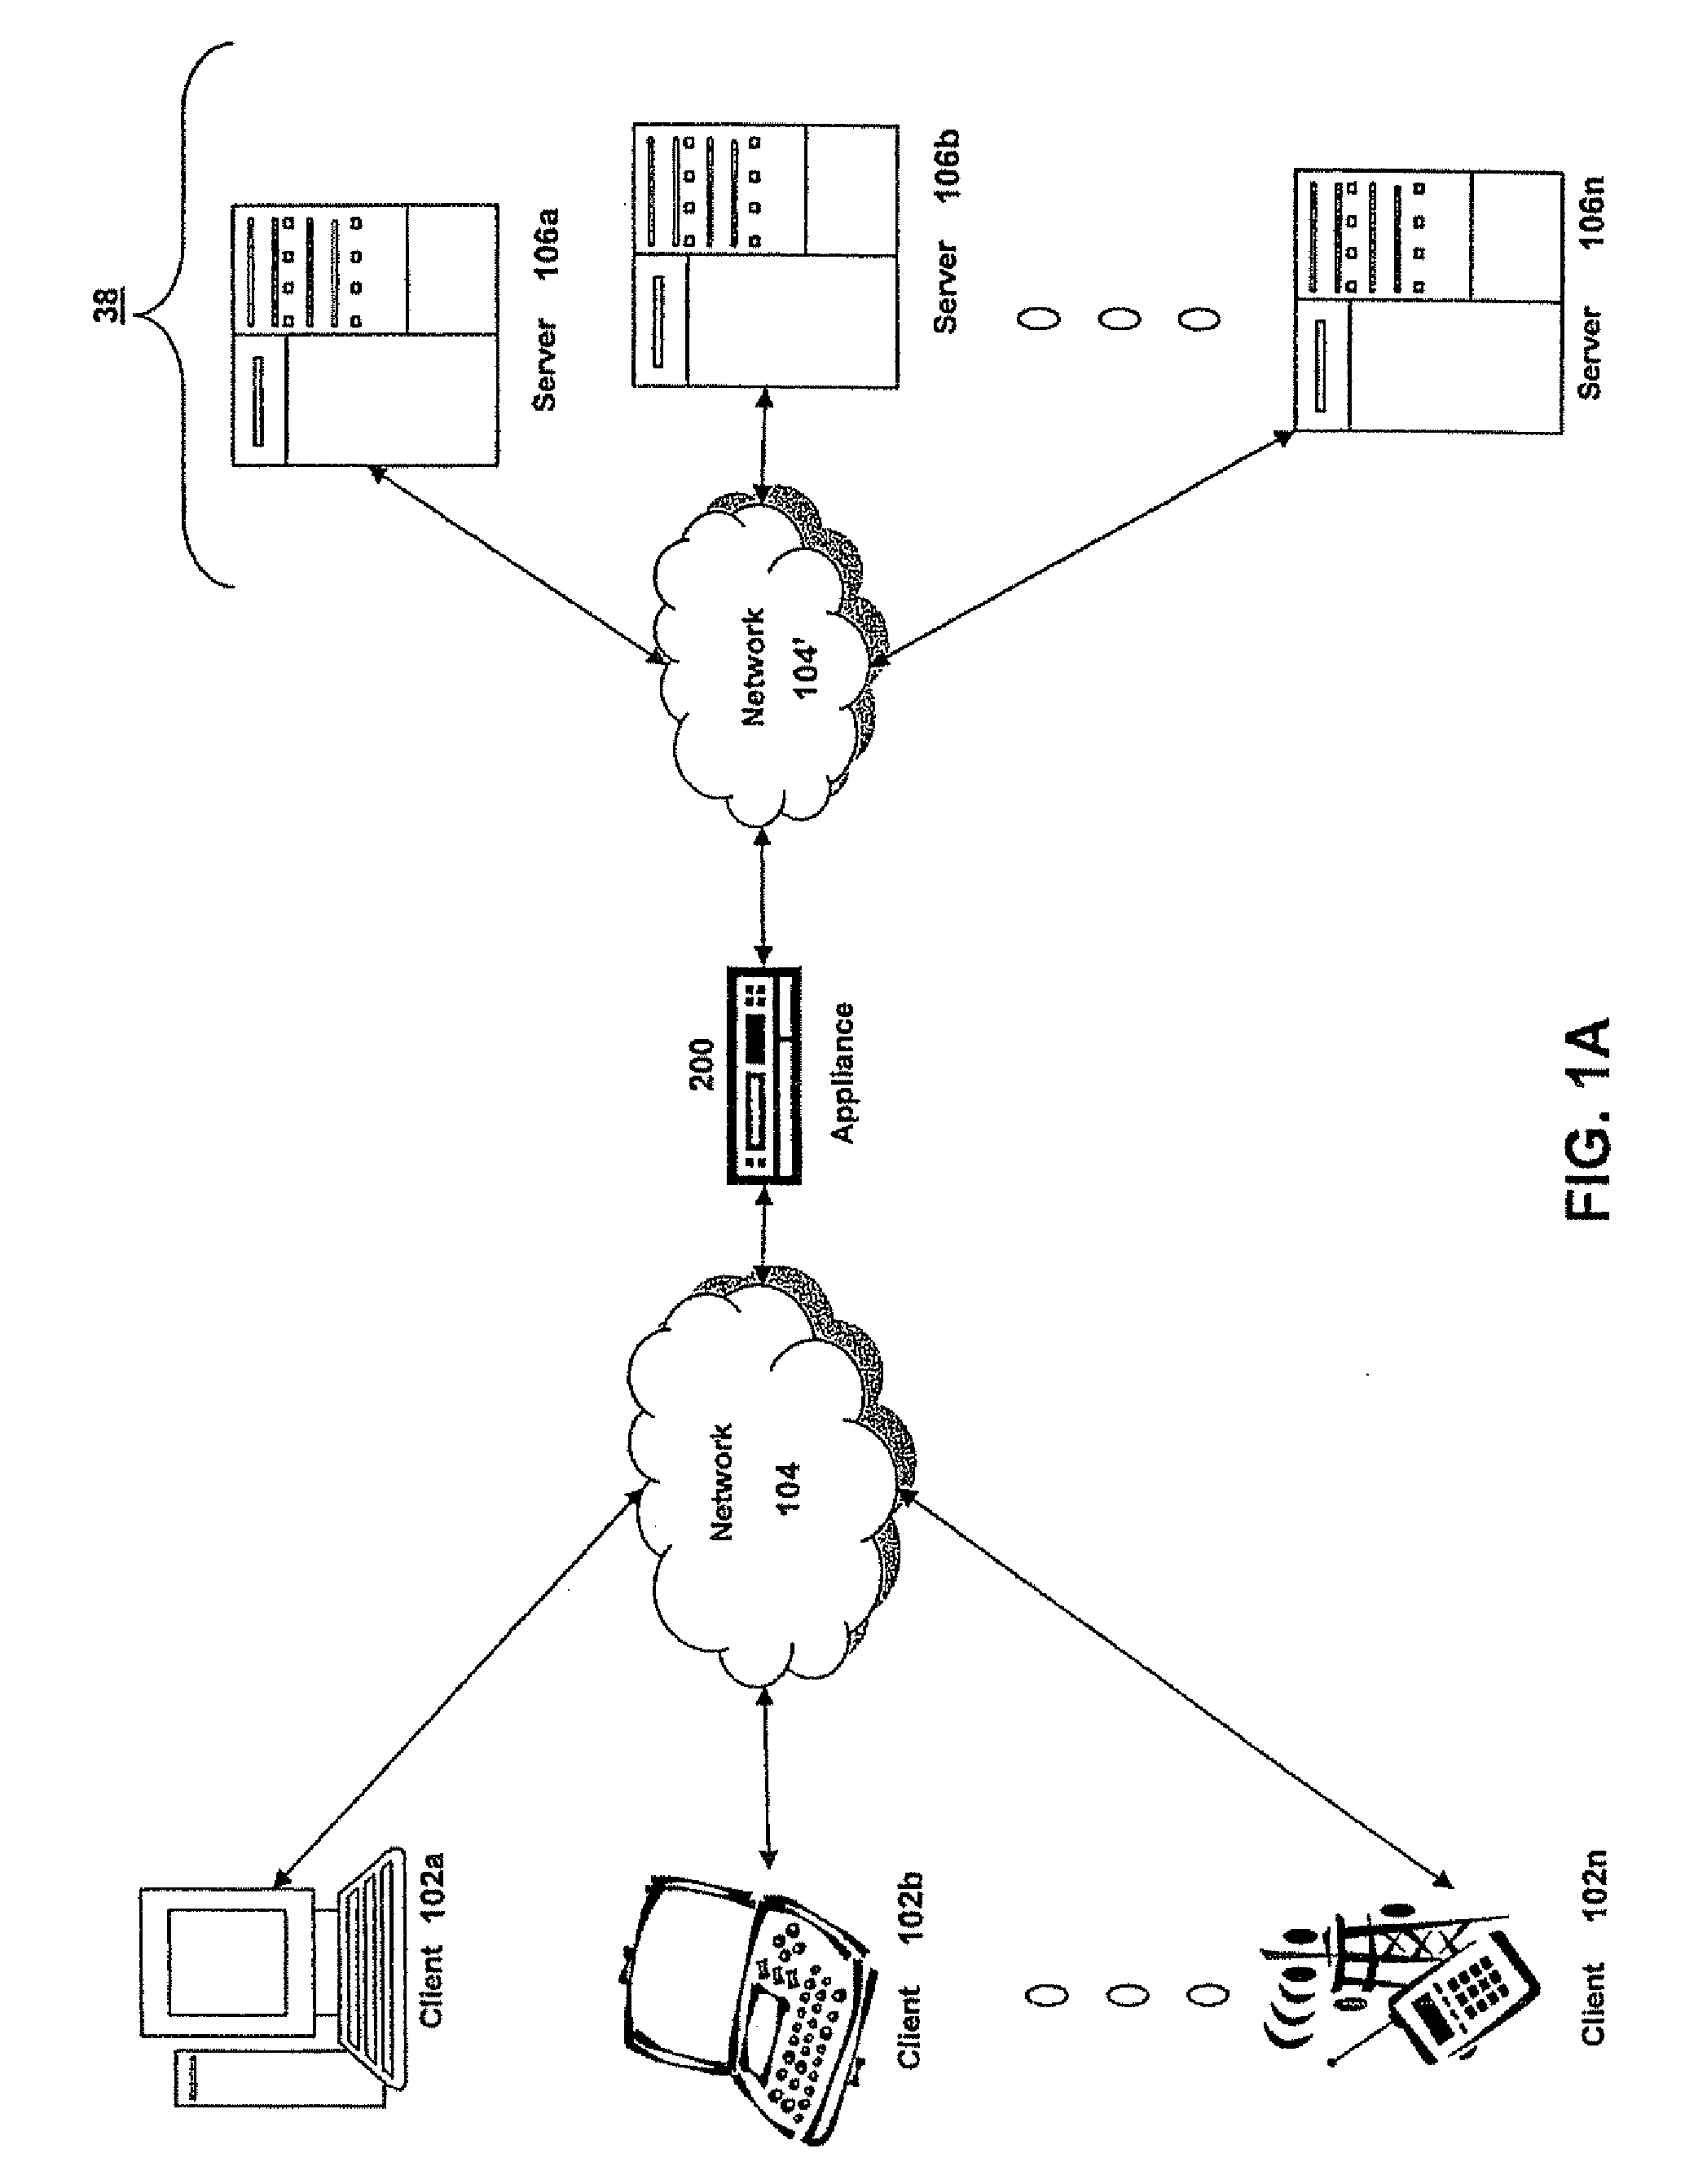 Systems and Methods of Installing An Application Without Rebooting